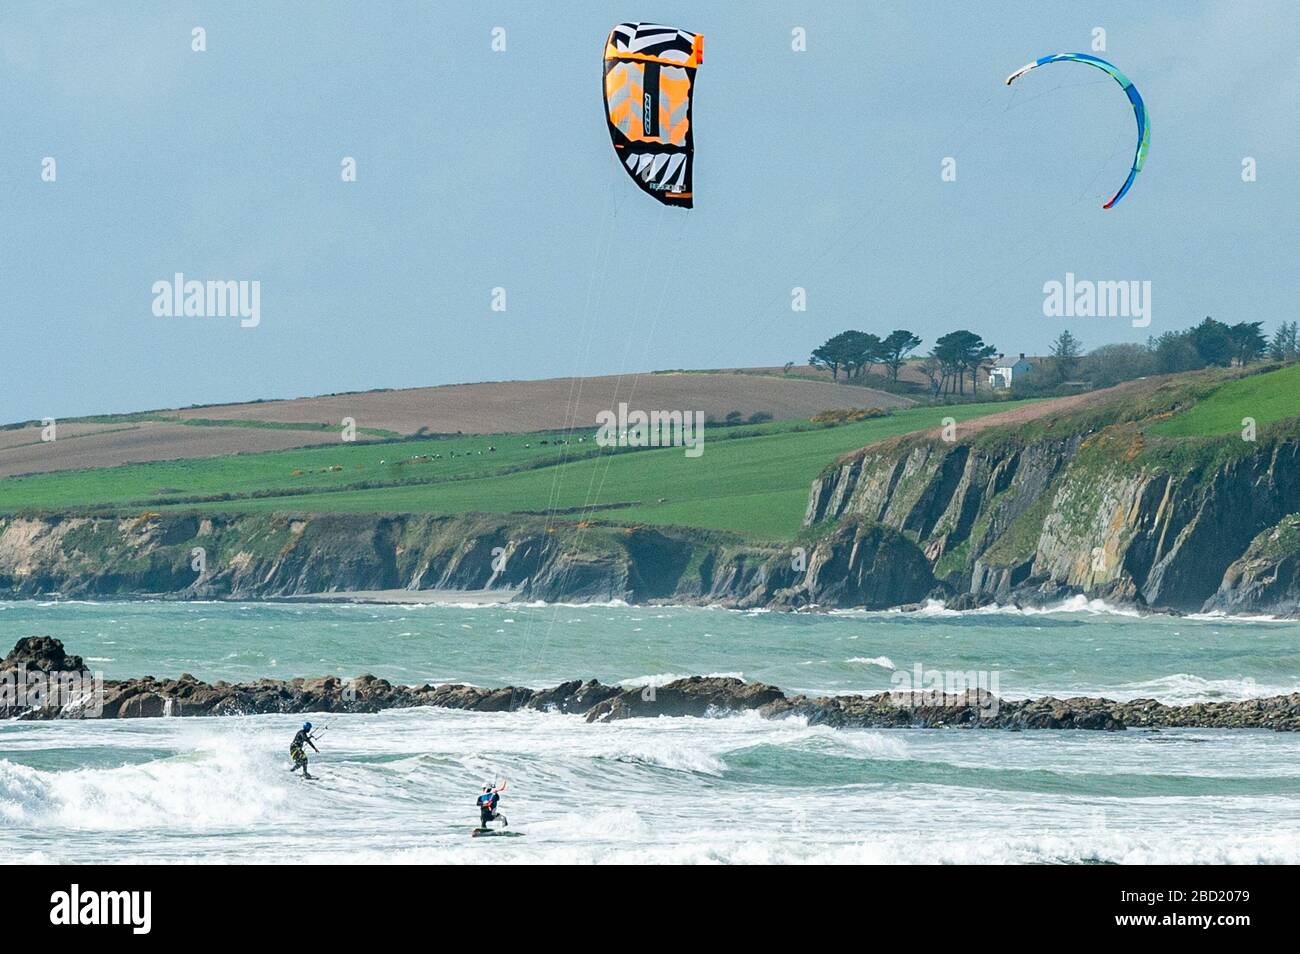 Garrettstown, West Cork, Ireland. 6th Apr, 2020. Two kite surfers enjoy the strong winds and big waves at Garrettstown Beach whilst observing the Government's social distancing guidelines during the Covid-19 pandemic. Credit: Andy Gibson/Alamy Live News Stock Photo